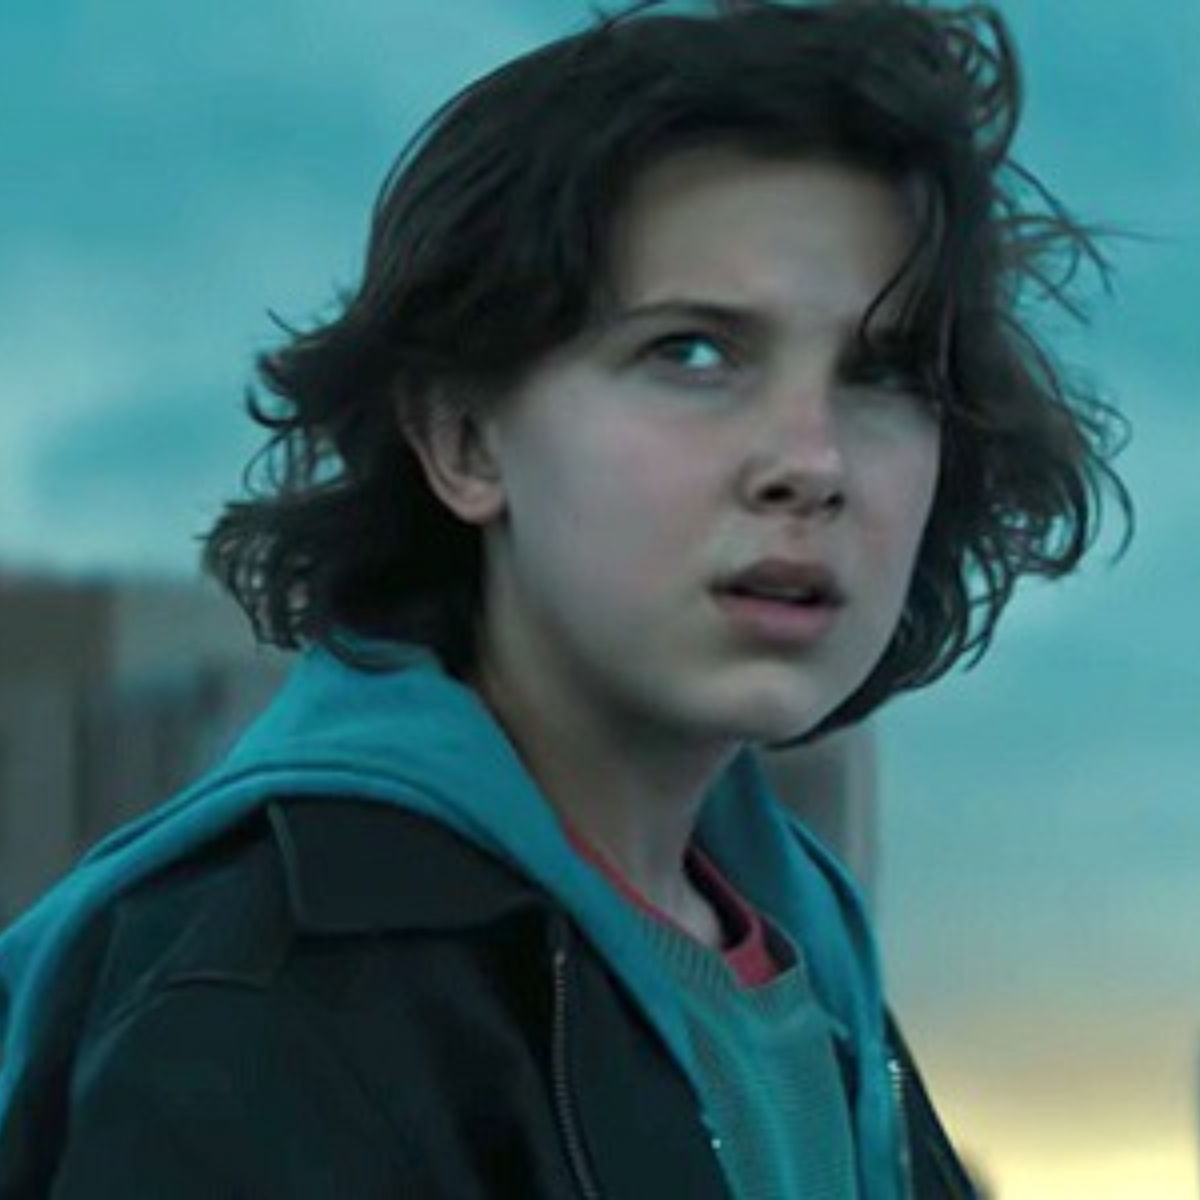 Godzilla: King of the Monsters Box Office Collection Day 4 India: Millie Bobby Brown starrer has a decent hold